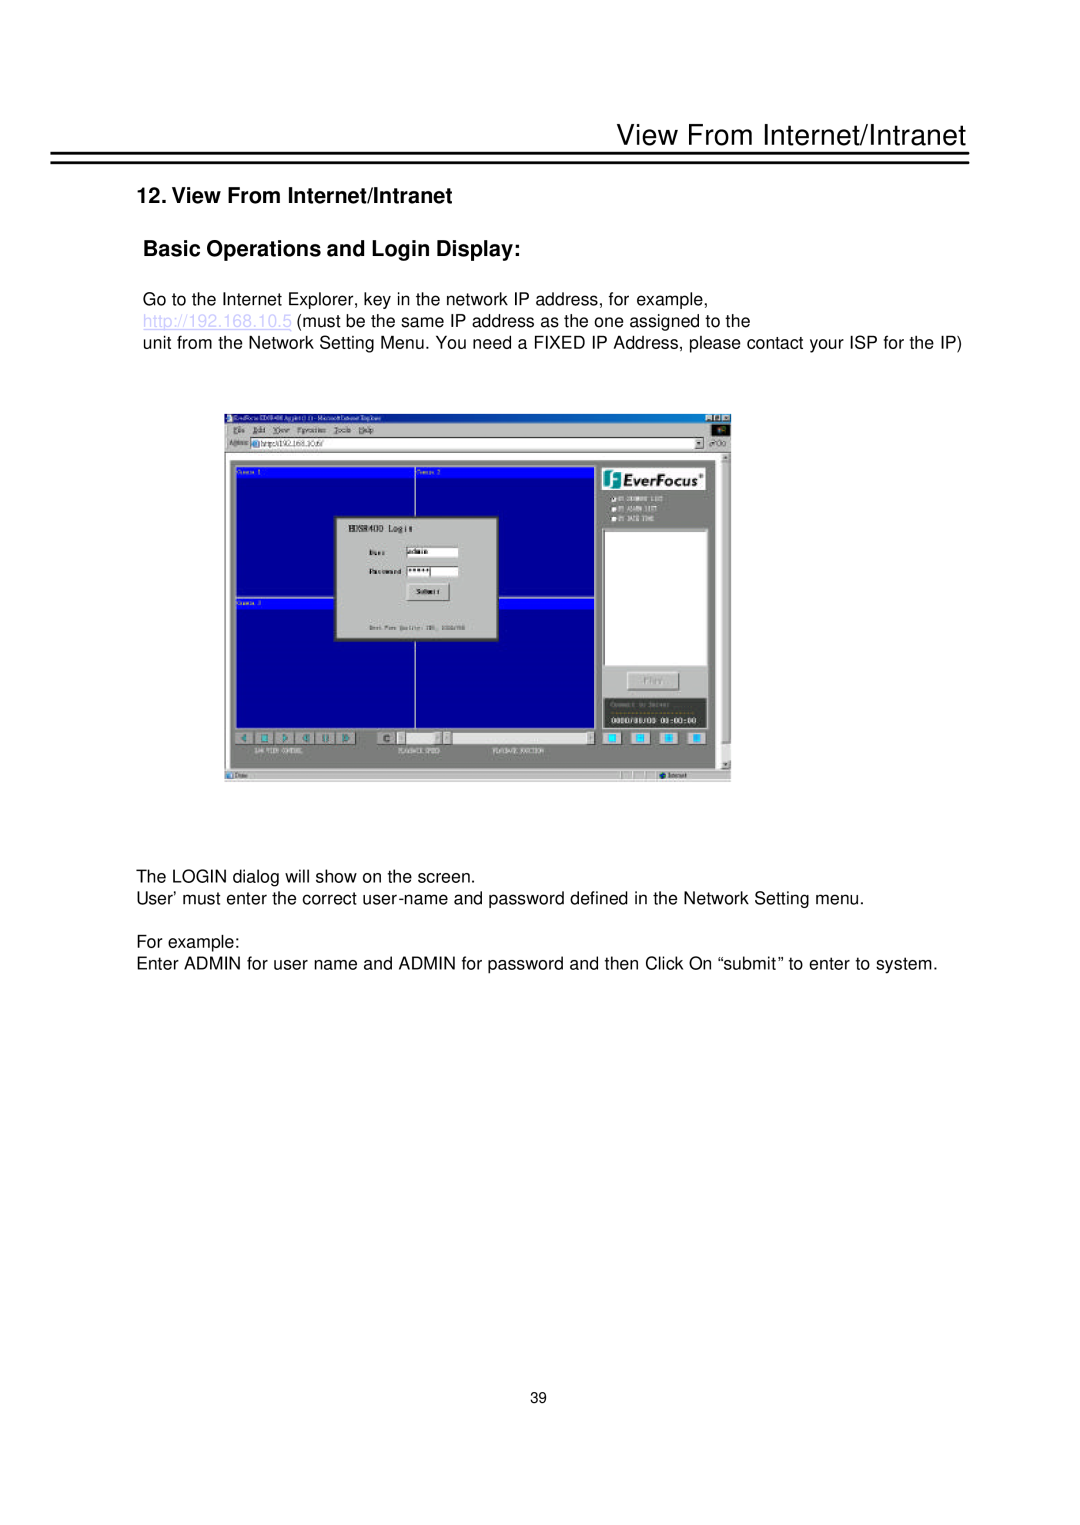 EverFocus EDSR-400, EDSR-600 instruction manual View From Internet/Intranet Basic Operations and Login Display 